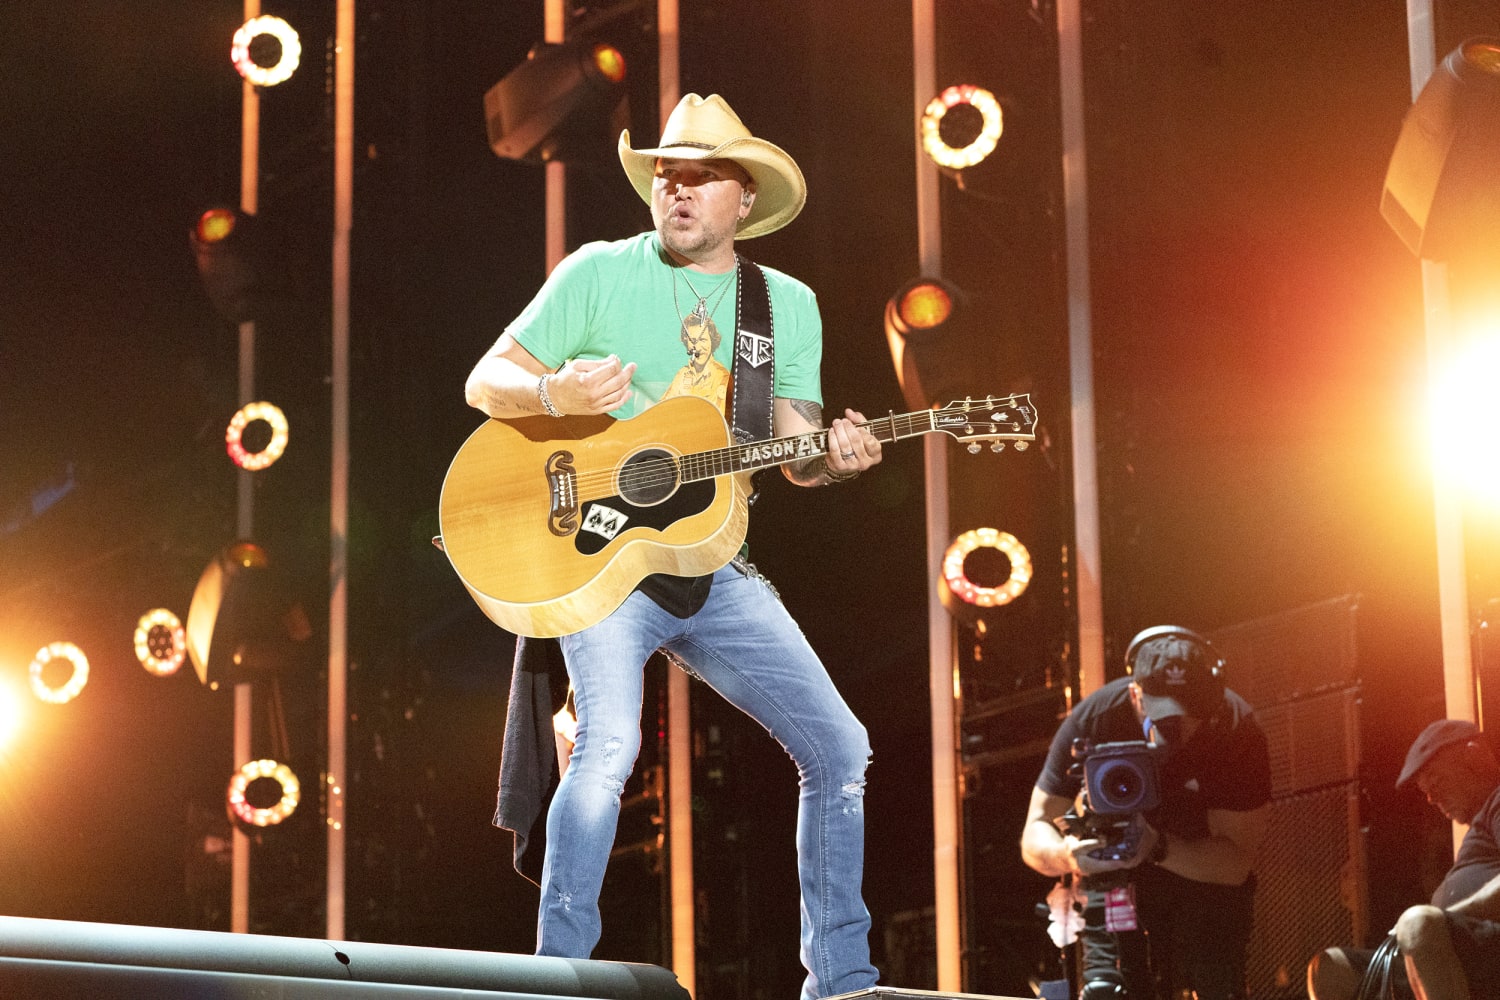 CMT pulls Jason Aldean’s controversial ‘Try That in a Small Town’ video